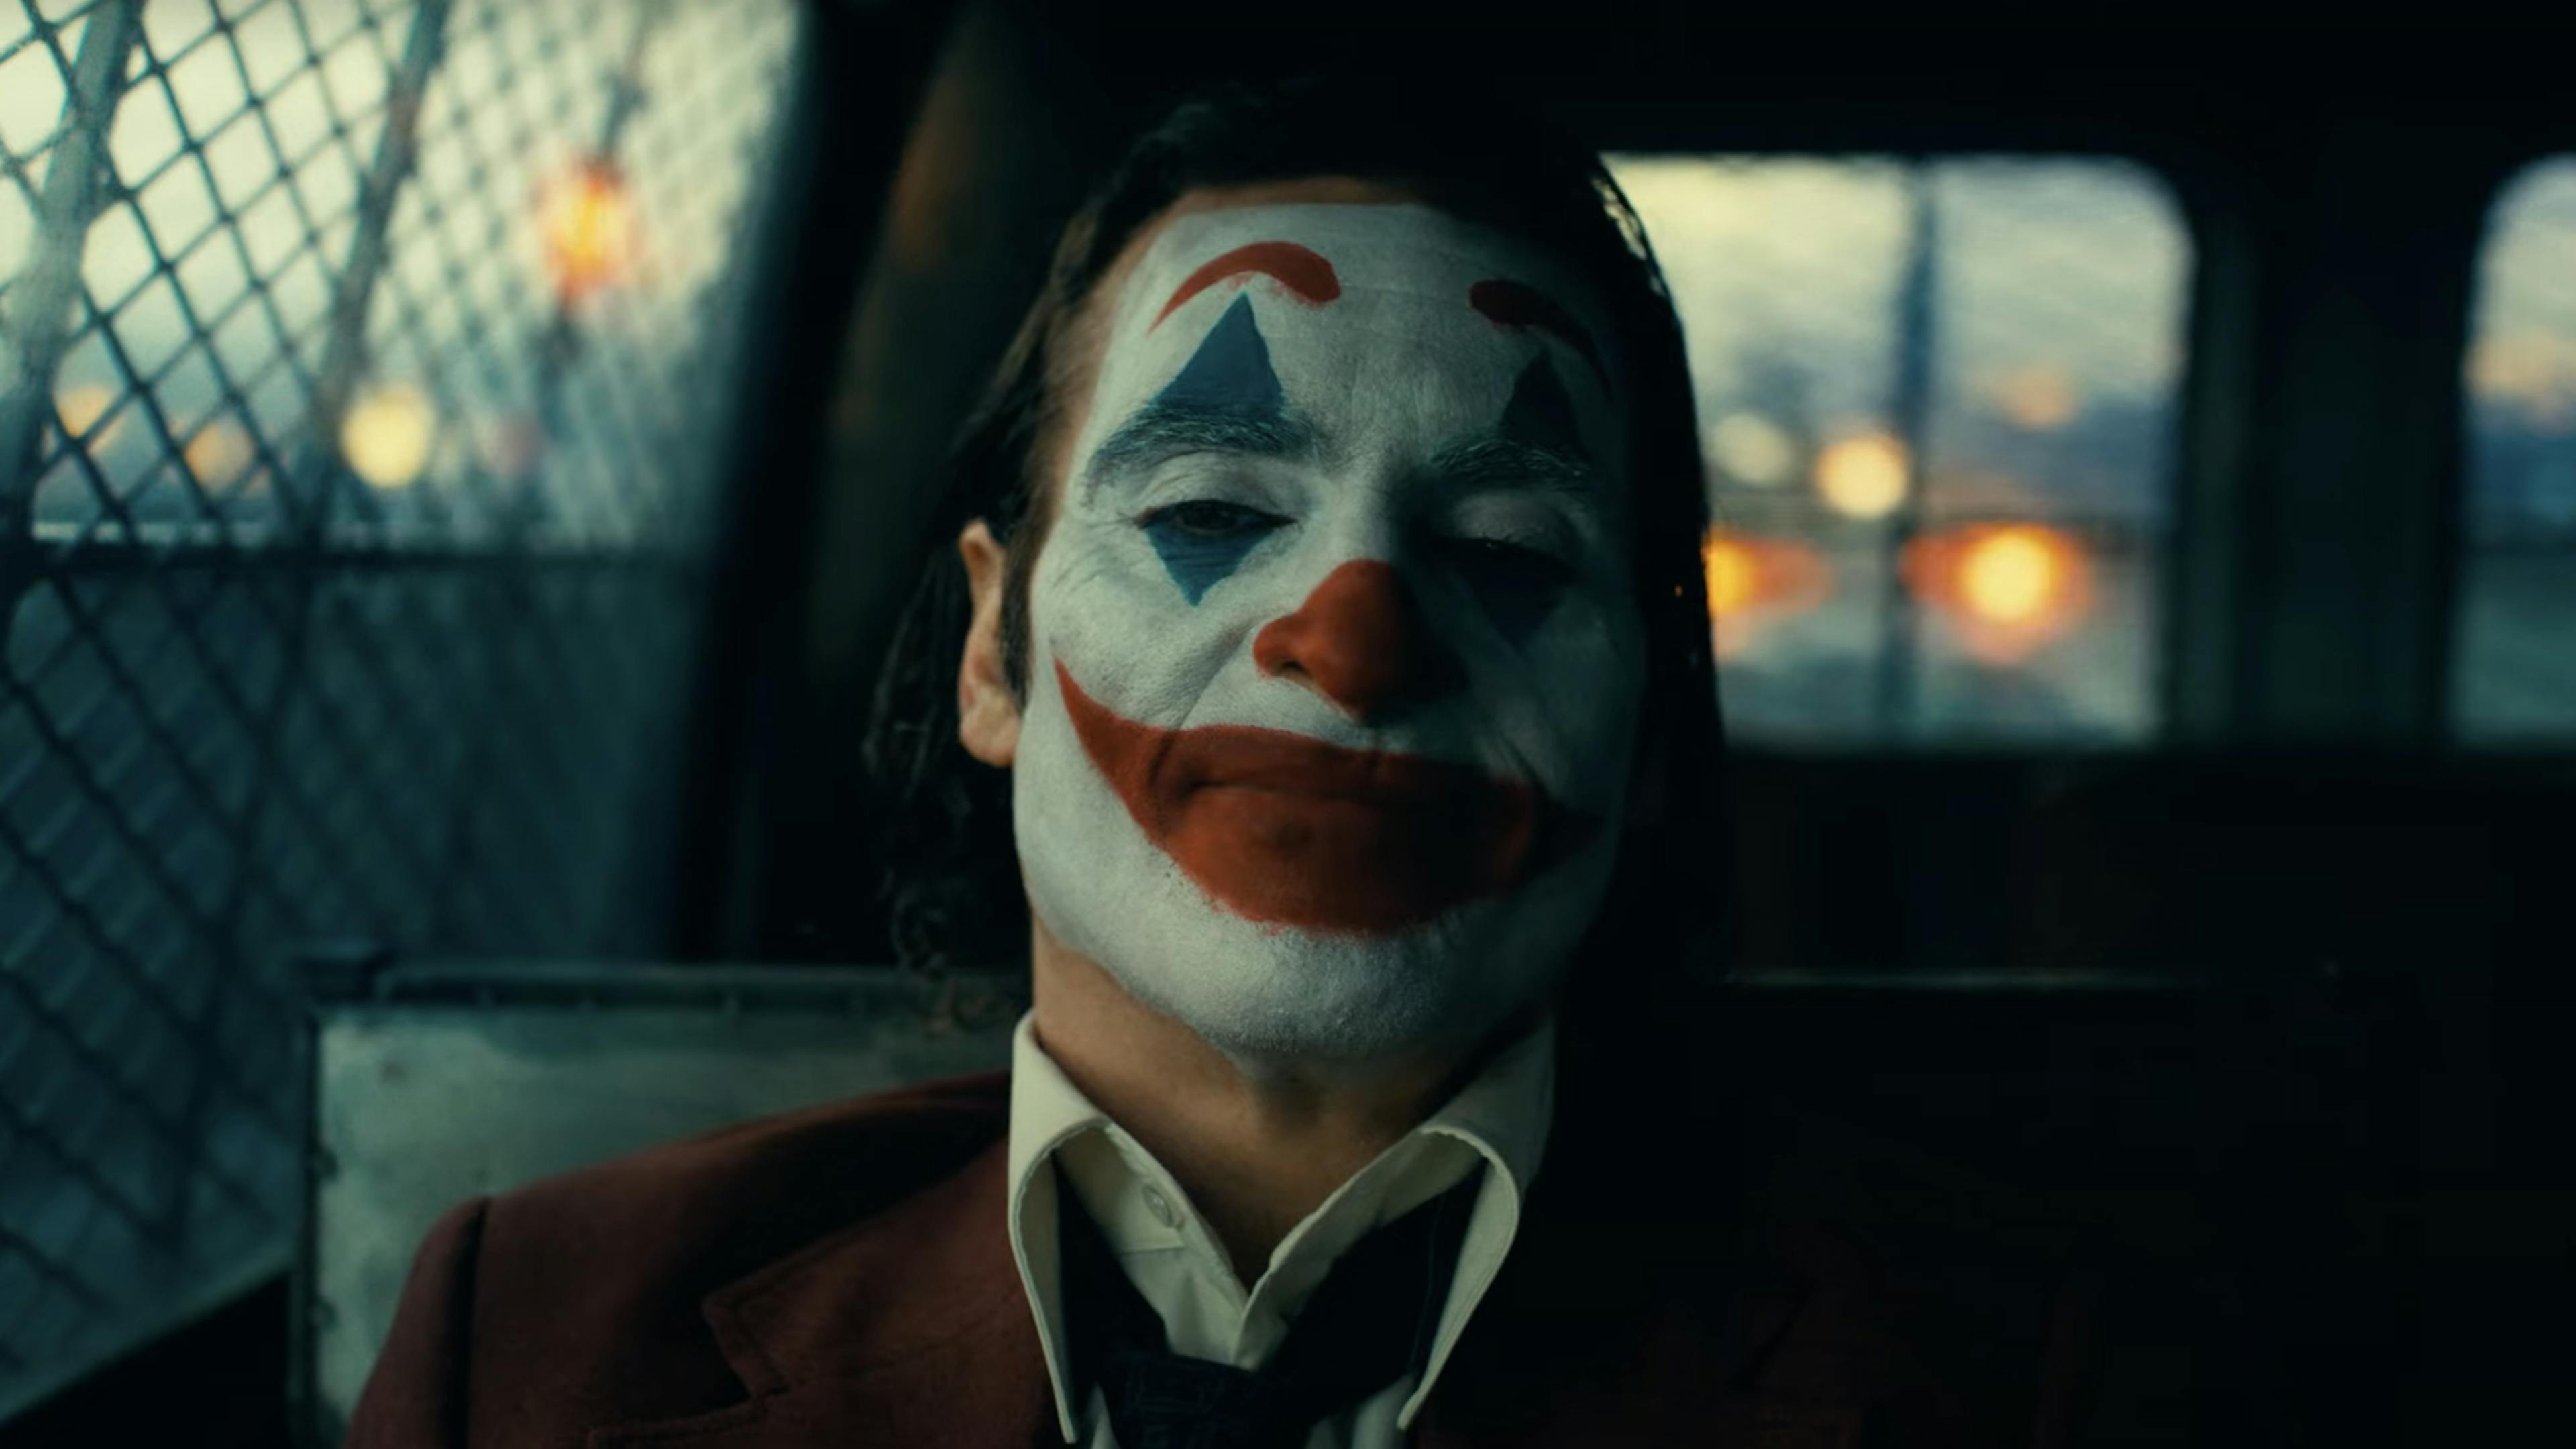 See more of Joaquin Phoenix and Lady Gaga in the brand-new trailer for Joker: Folie À Deux